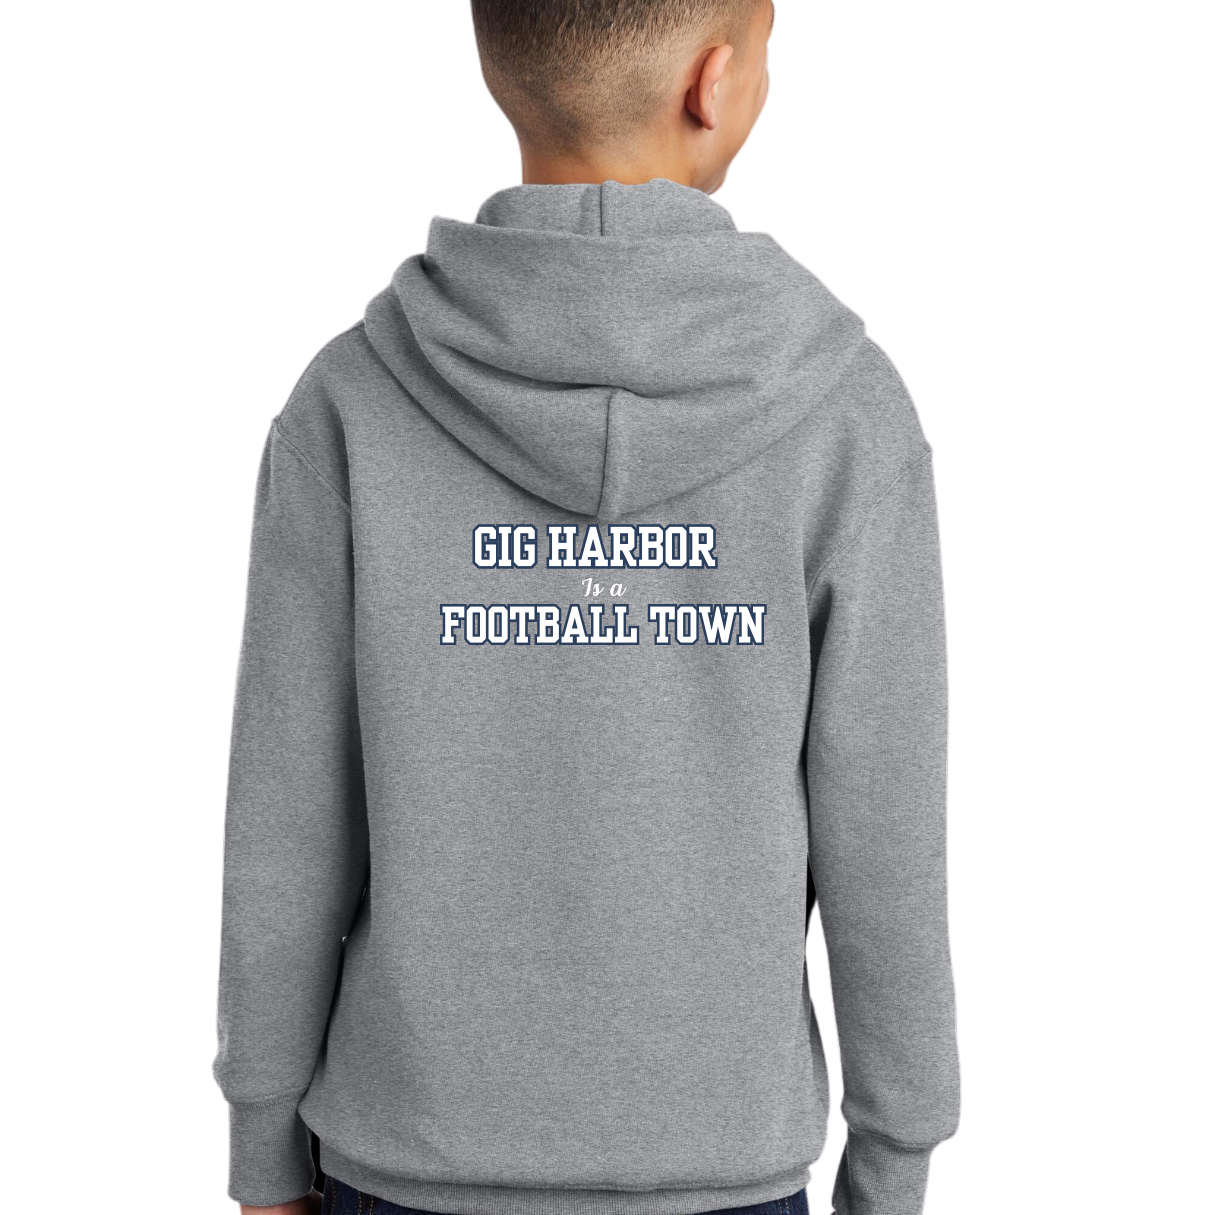 Gig Harbor is a Football Town Hooded Sweatshirt - Adult and Youth